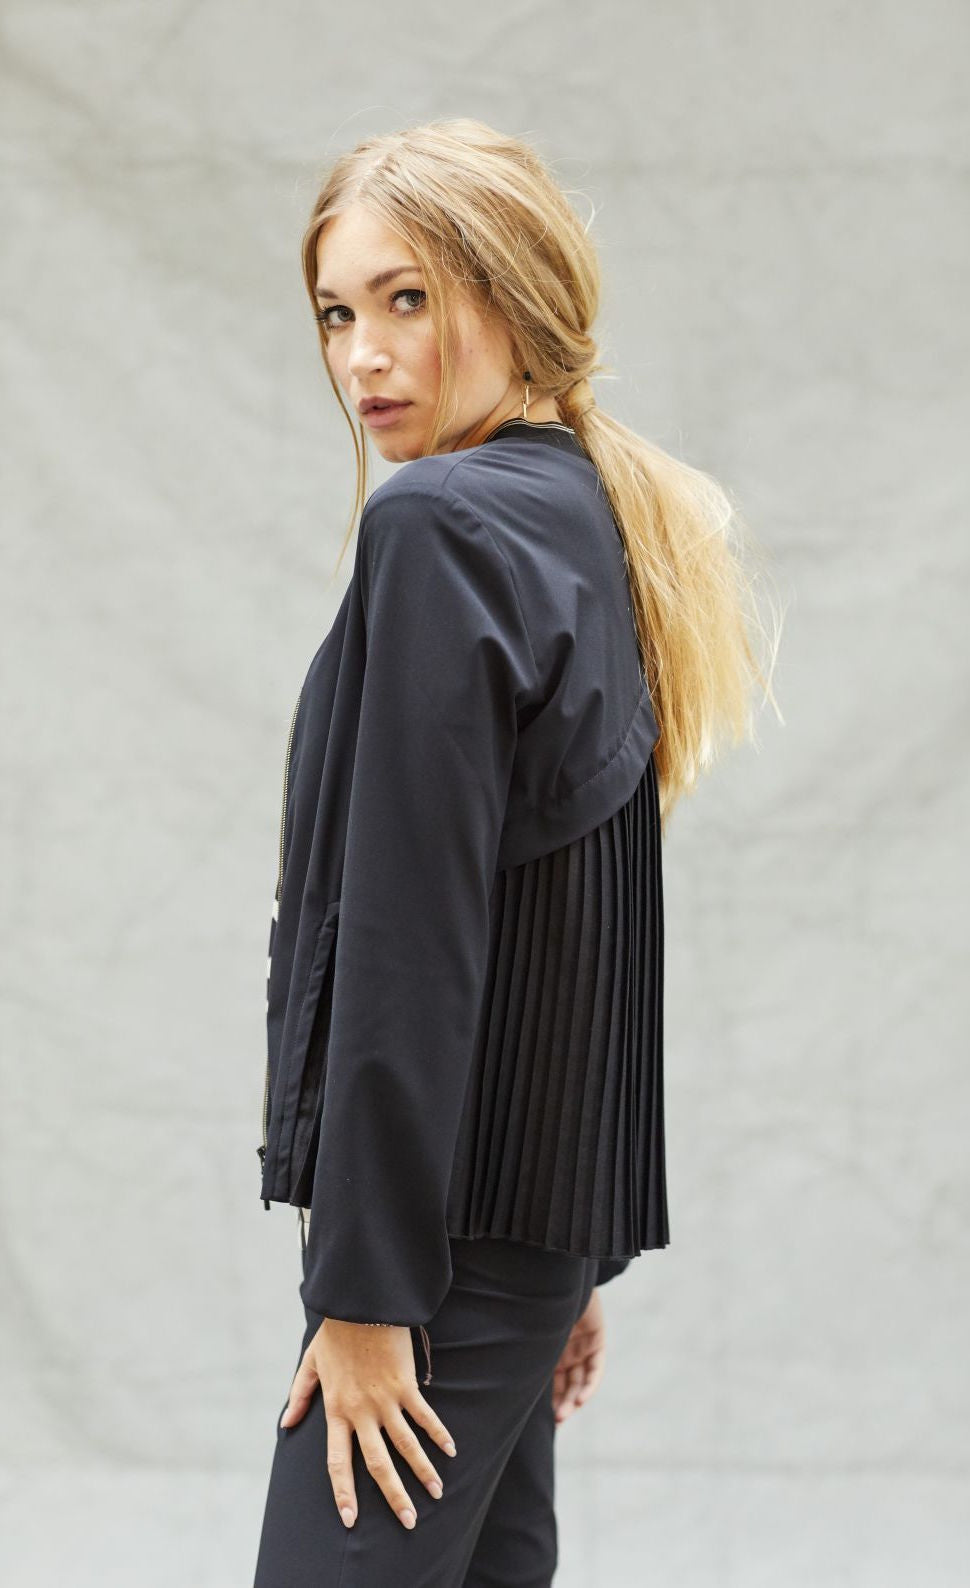 Back left side top half view of a woman wearing black pants and the indies black fute jacket. This jacket has pleats on the back with a criss-crossing of fabric on the upper back.